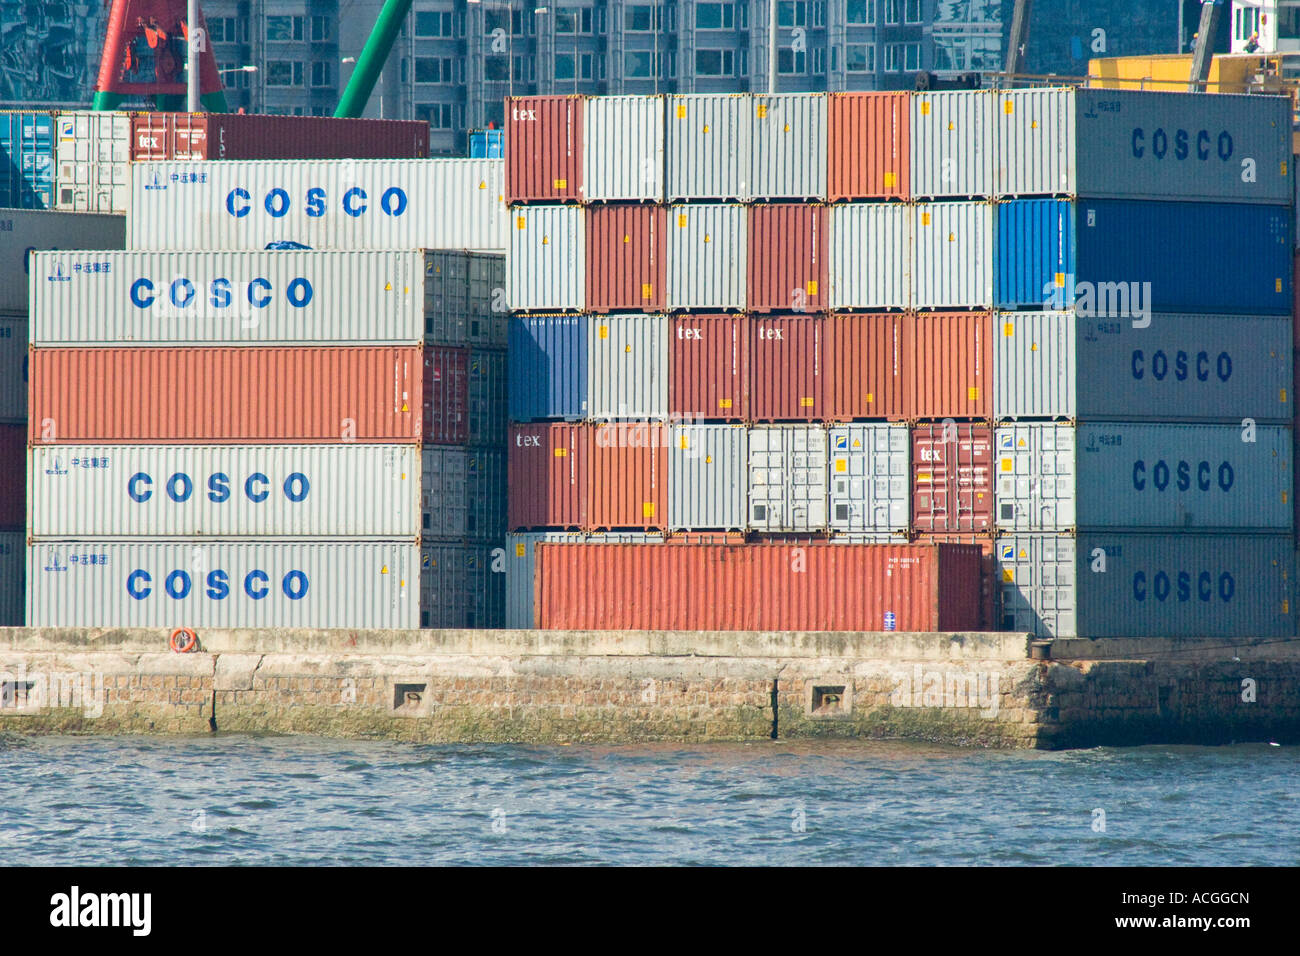 Cosco Shipping Containers Victoria Kowloon Victoria Harbour Hong Kong SAR Stock Photo